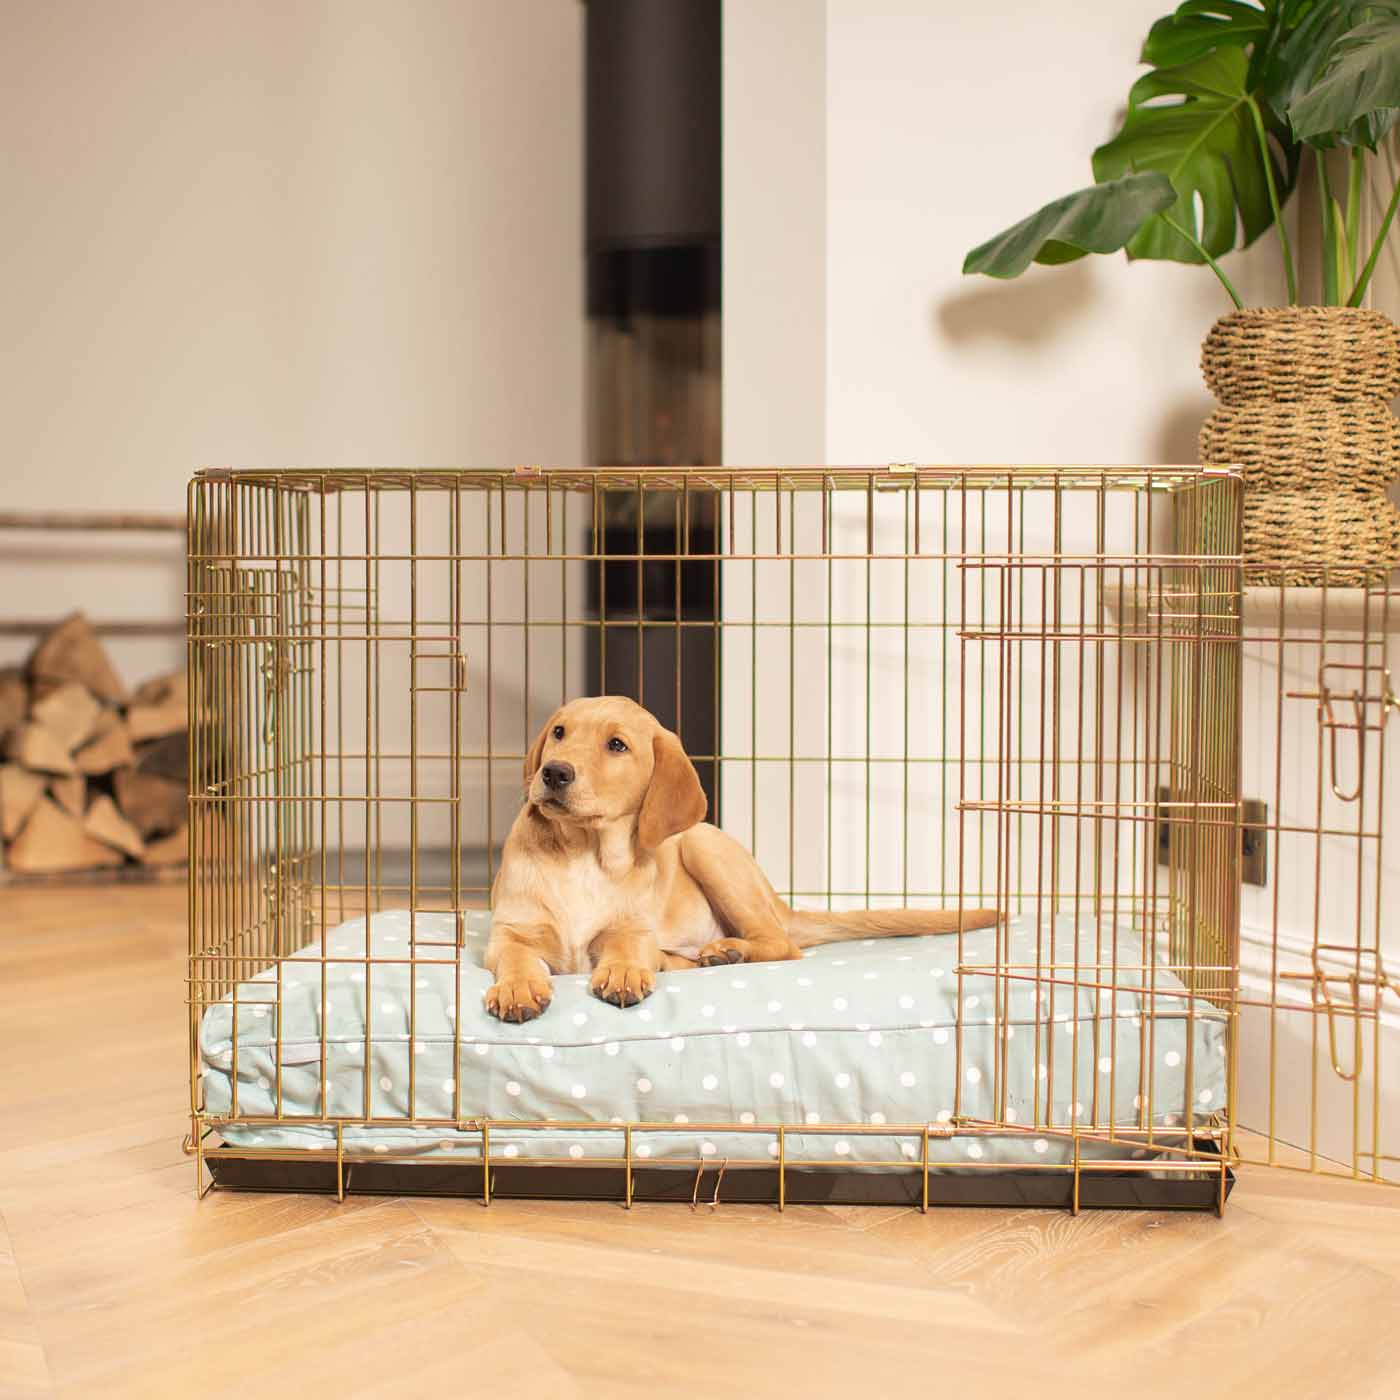 Luxury Dog Crate Cushion, Duck Egg Spot Crate Cushion The Perfect Dog Crate Accessory, Available To Personalise Now at Lords & Labradors